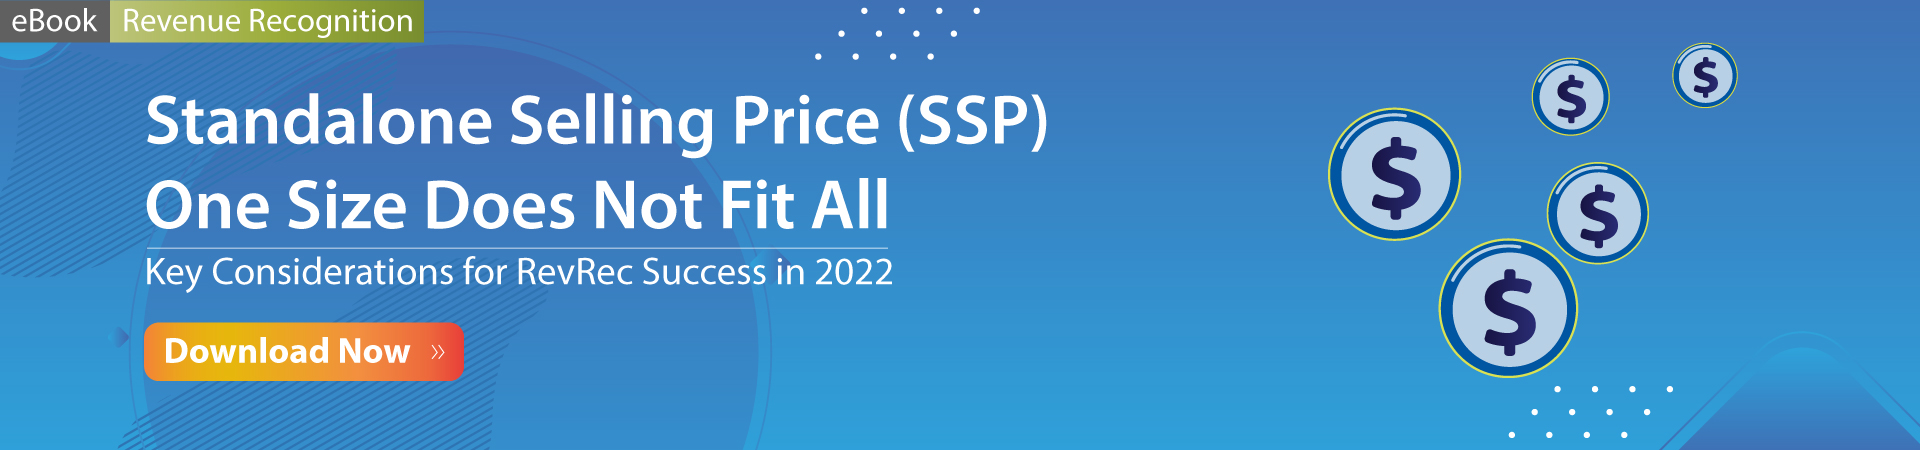 Standalone Selling Price (SSP) Banner